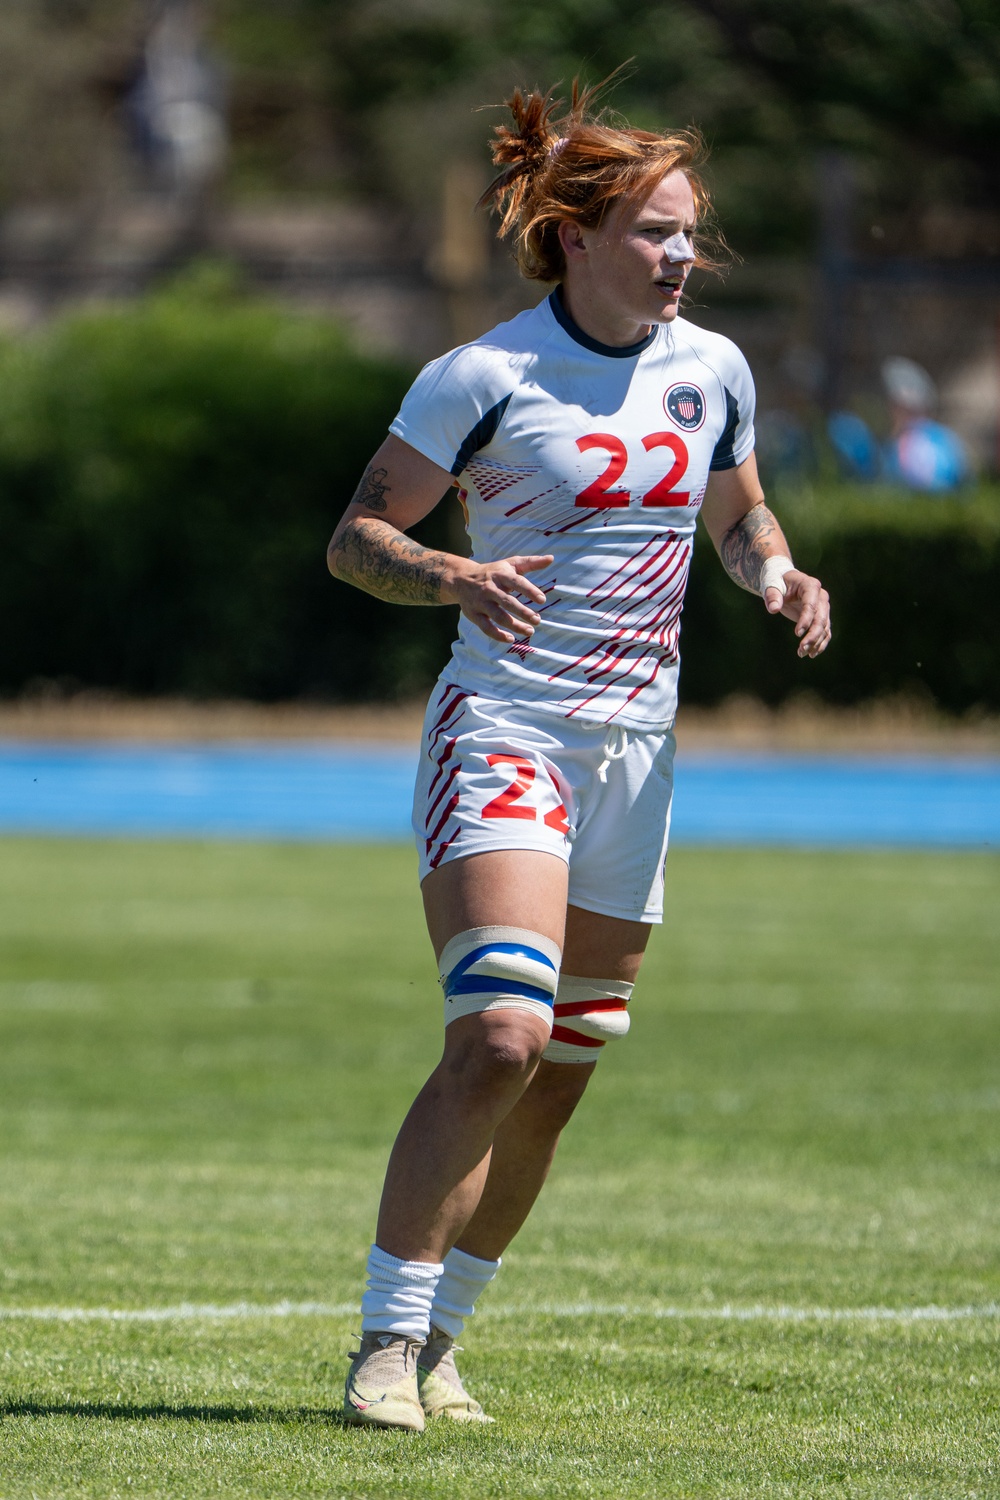 1st Lt. Sam Sullivan and Sgt. Joanne Fa'avesi help U.S. Women's Rugby 7s team win the gold medal at the Pan American Games